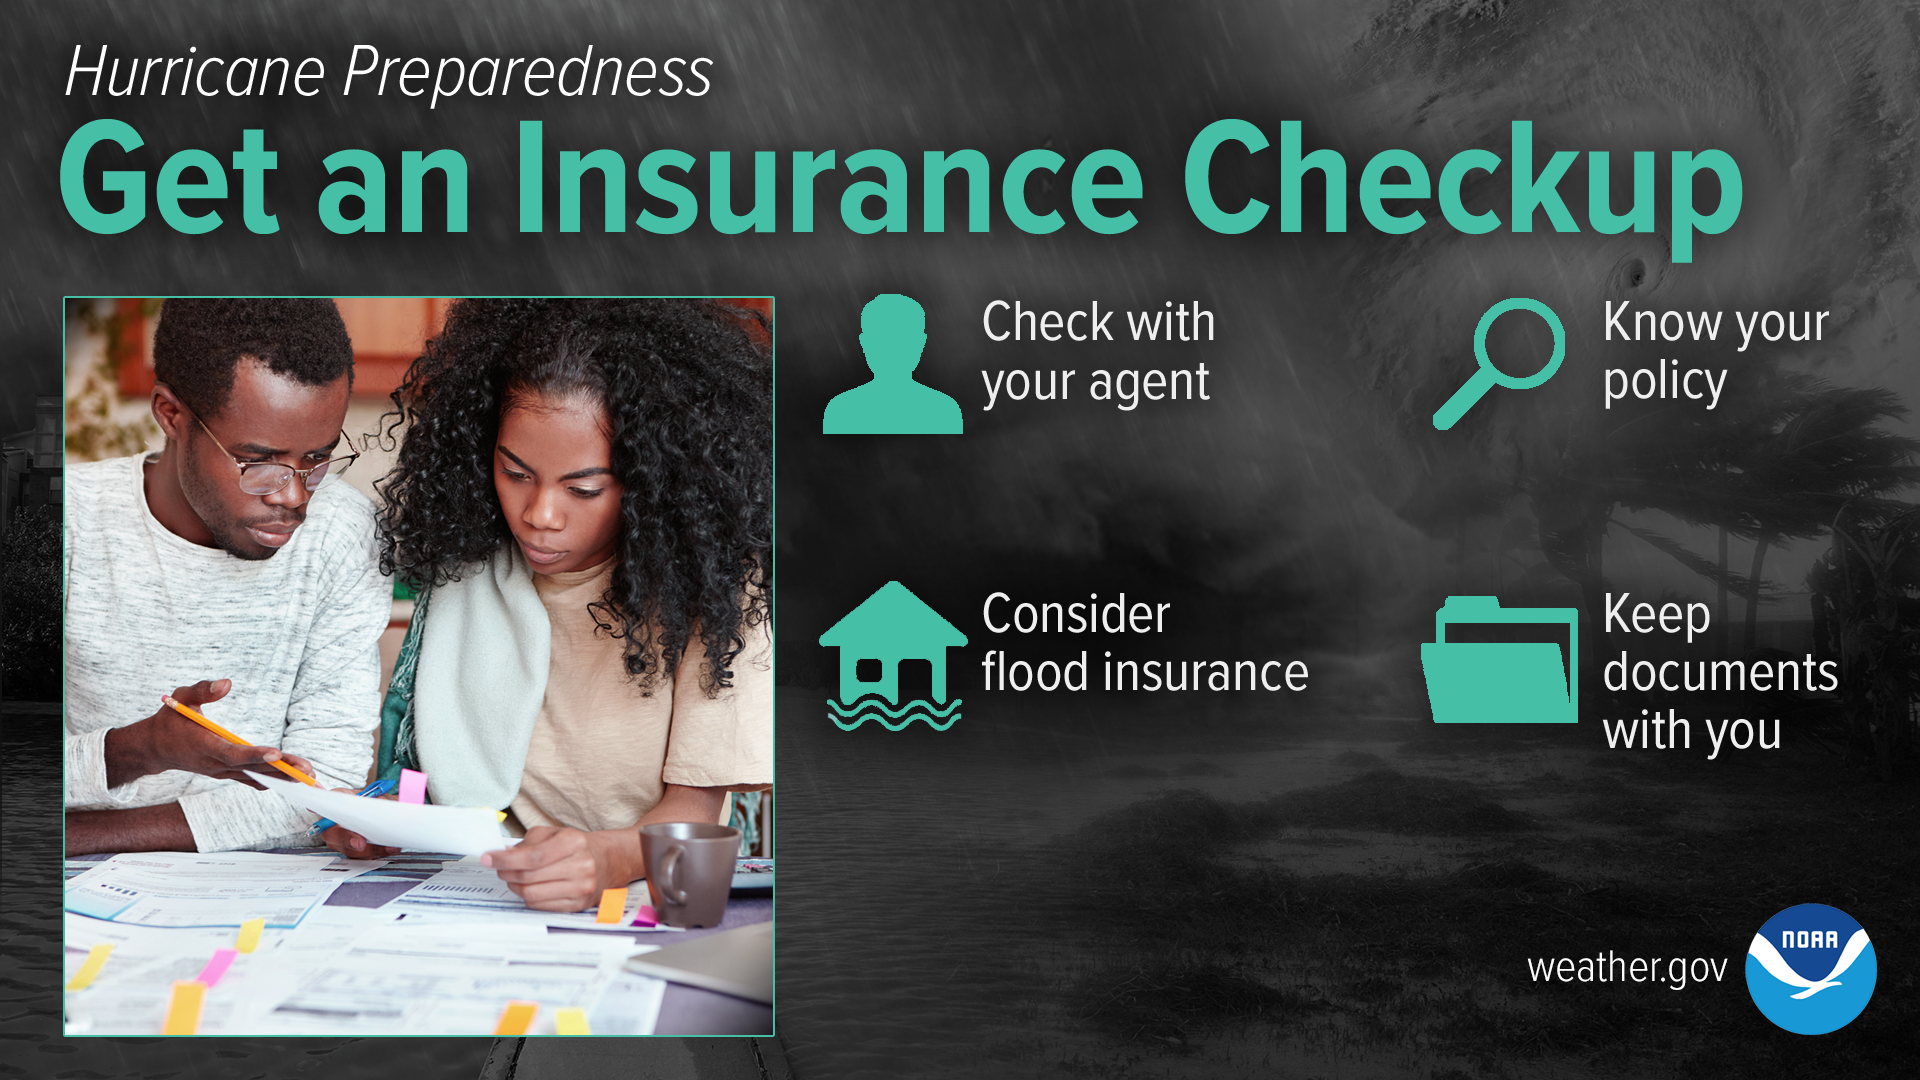 Hurricane Preparedness: Get An Insurance Checkup. Check in with your insurance agency before hurricane season. Remember that flood insurance must be obtained separately. Prepared your home and vehicles according to your policy. Know where your insurance documents are located and take them with you if evacuation. Visit floodsmart.gov for more.